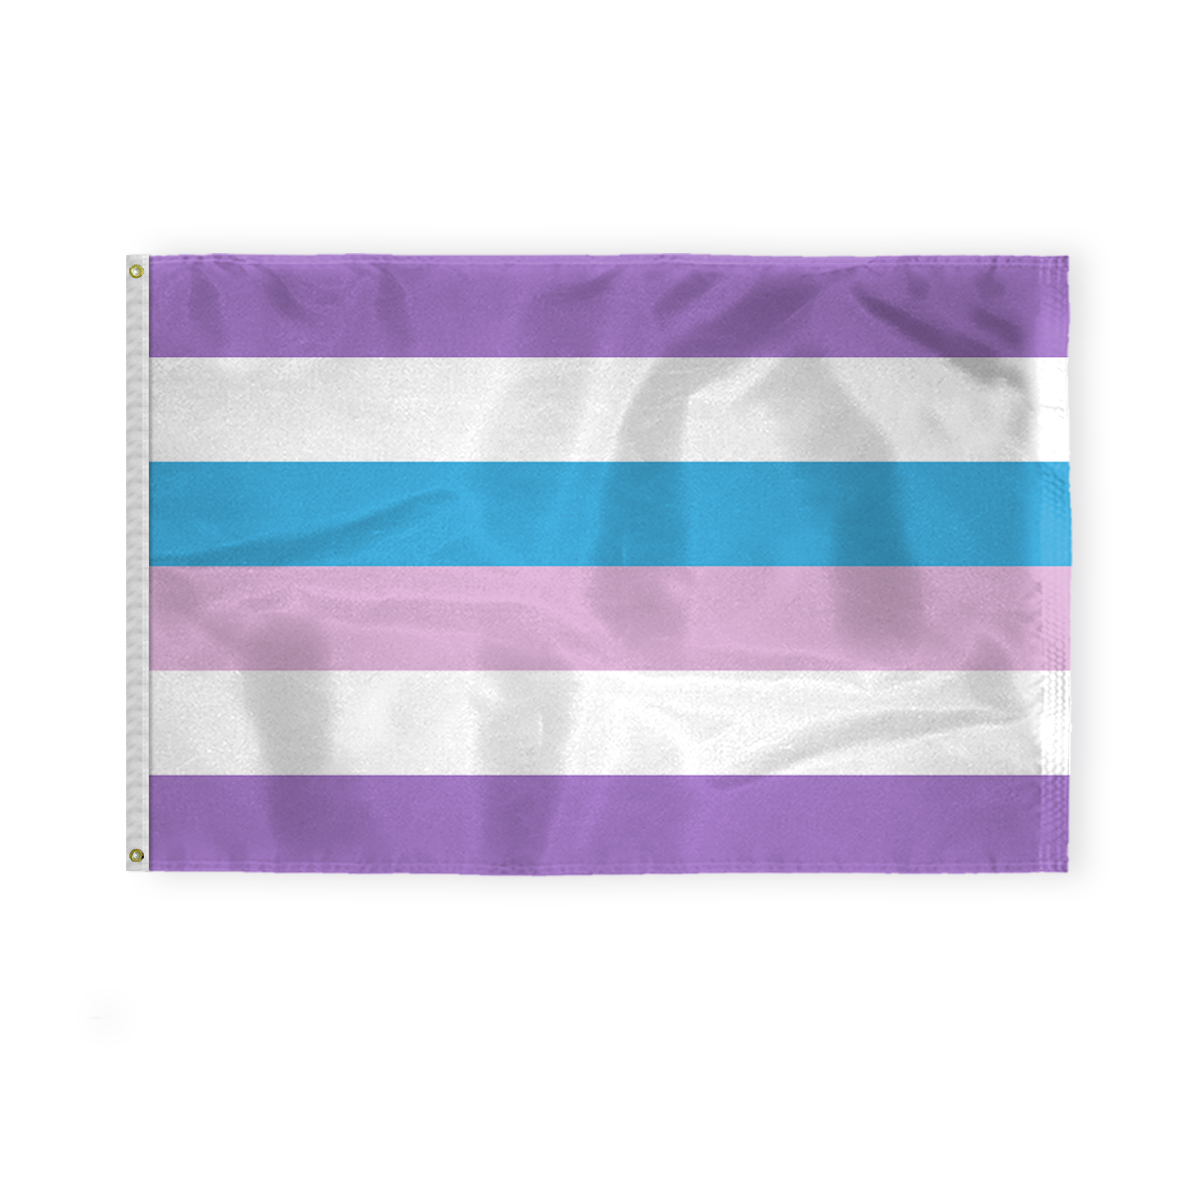 AGAS Bigender Pride Flag 4x6 Ft - Double Sided Printed 200D Nylon